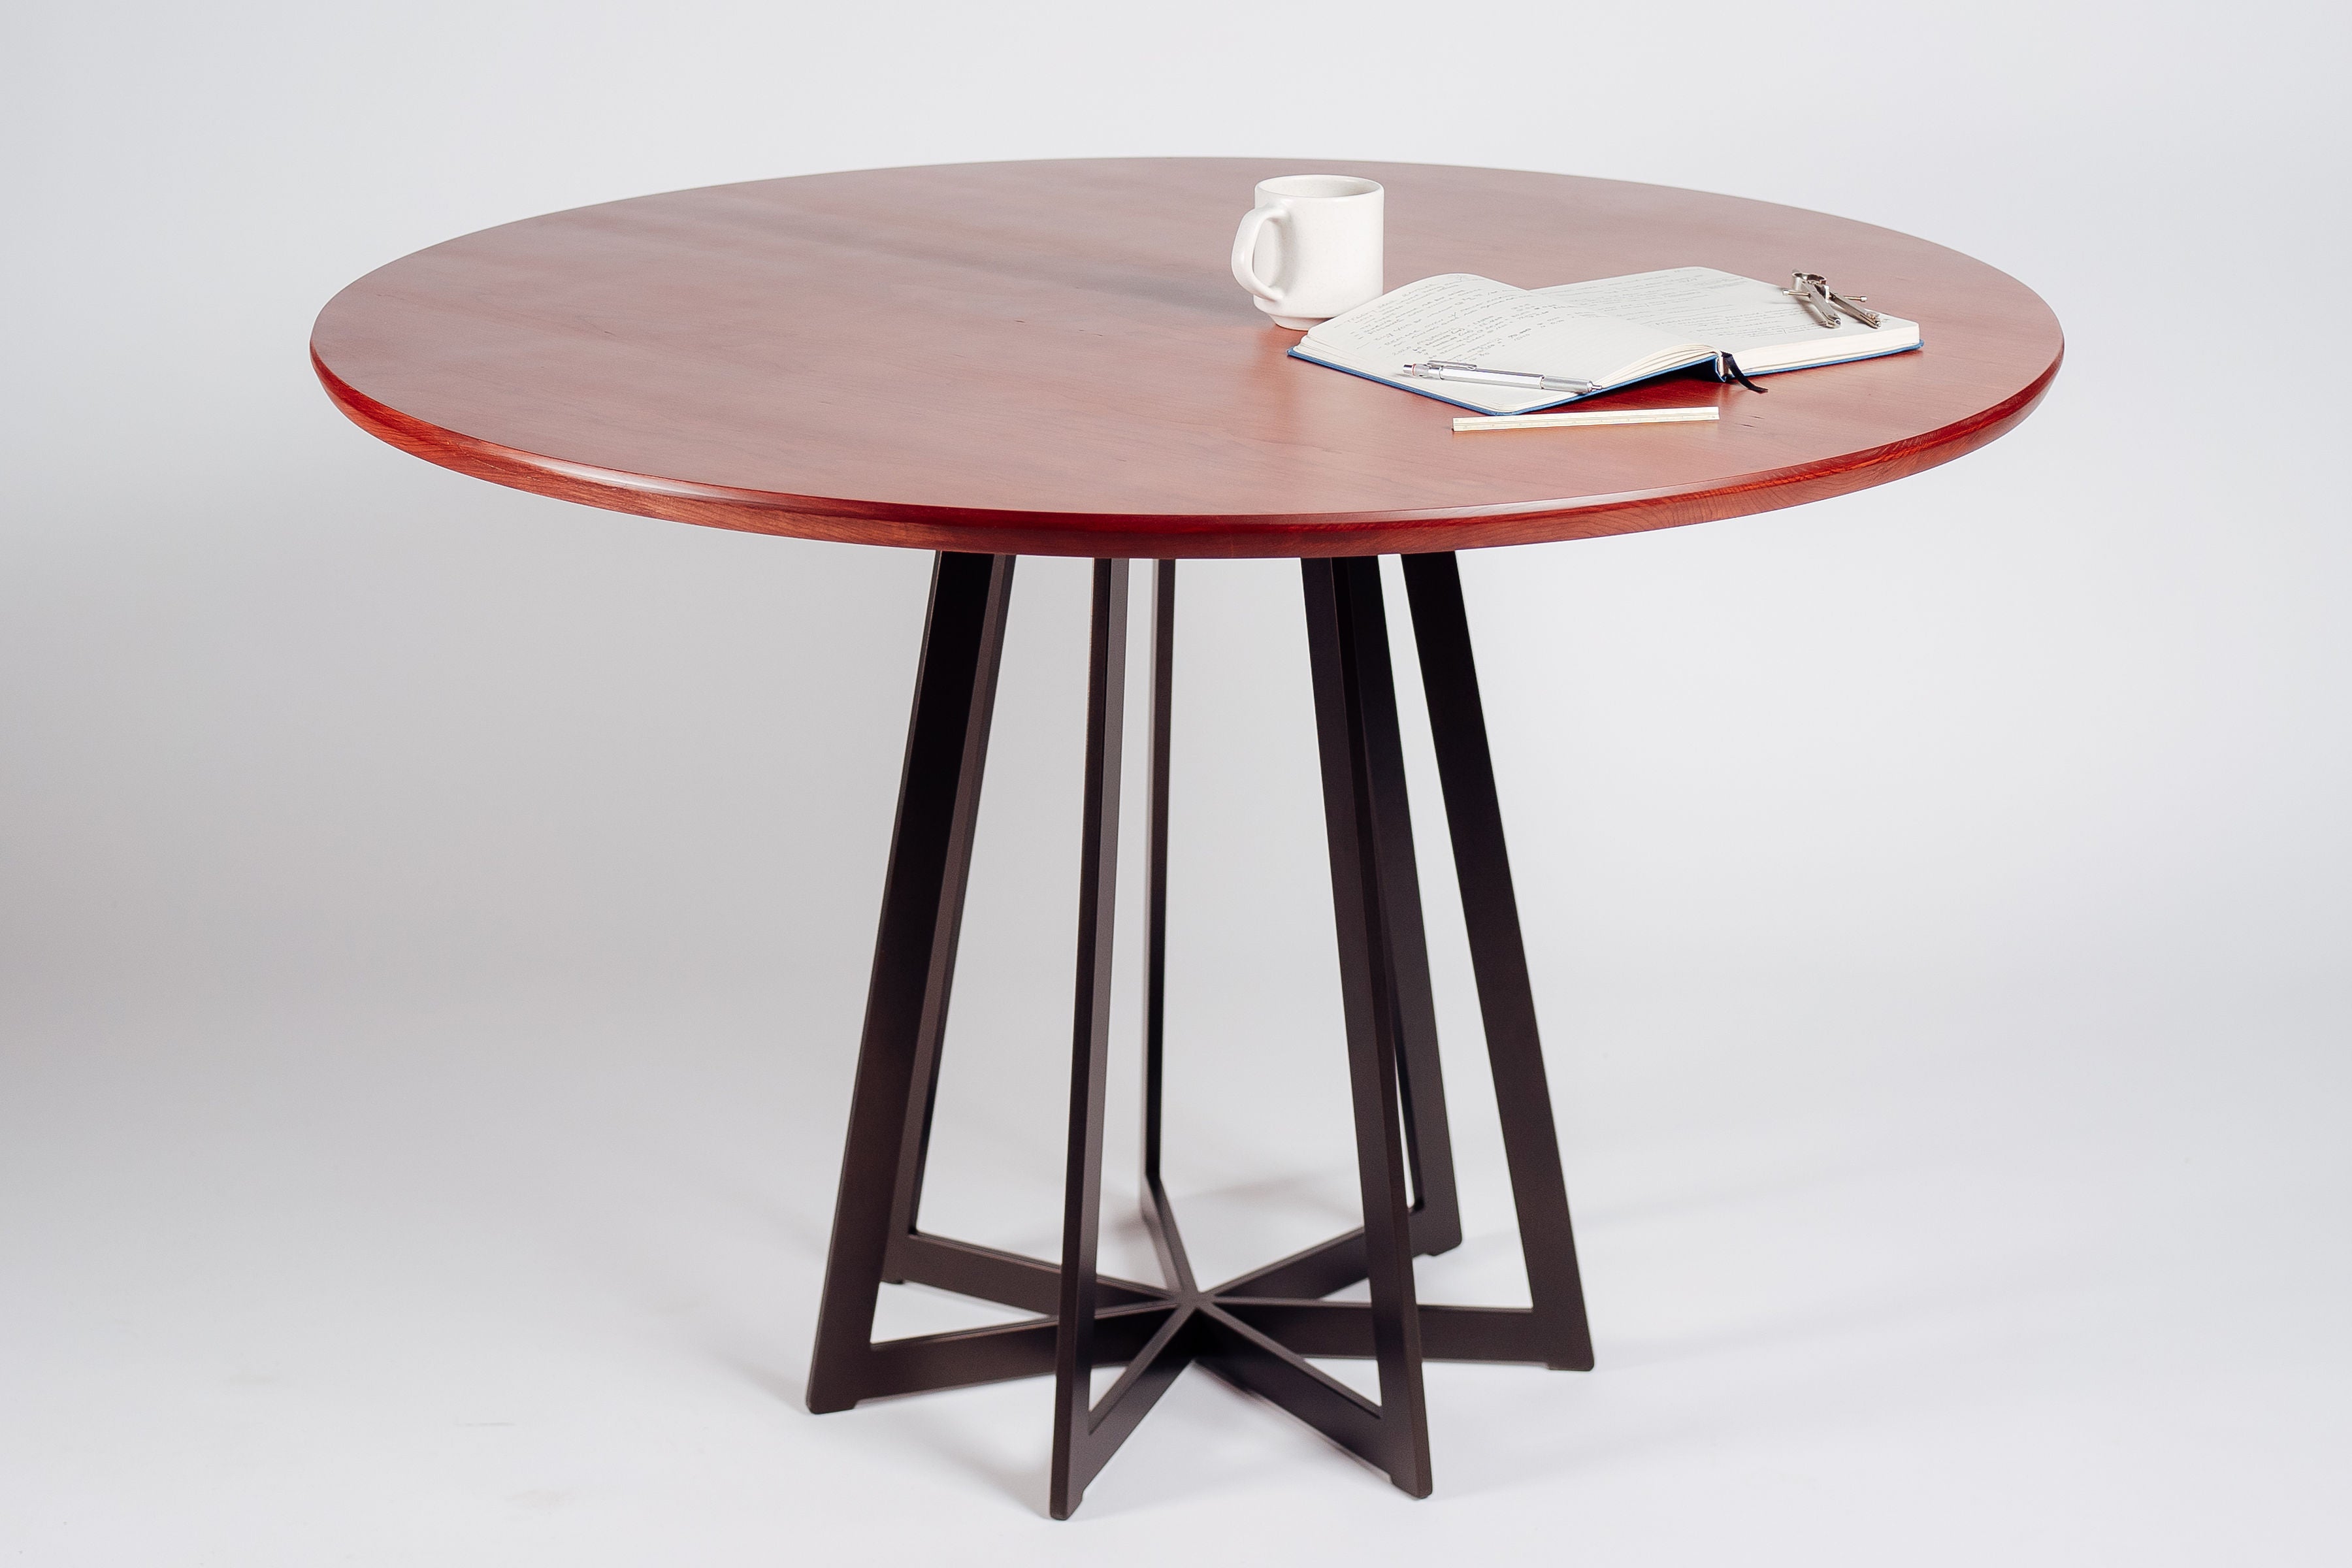 Paula midcentury modern cherry wood Meeting Table handcrafted by Hunt & Noyer in Michigan